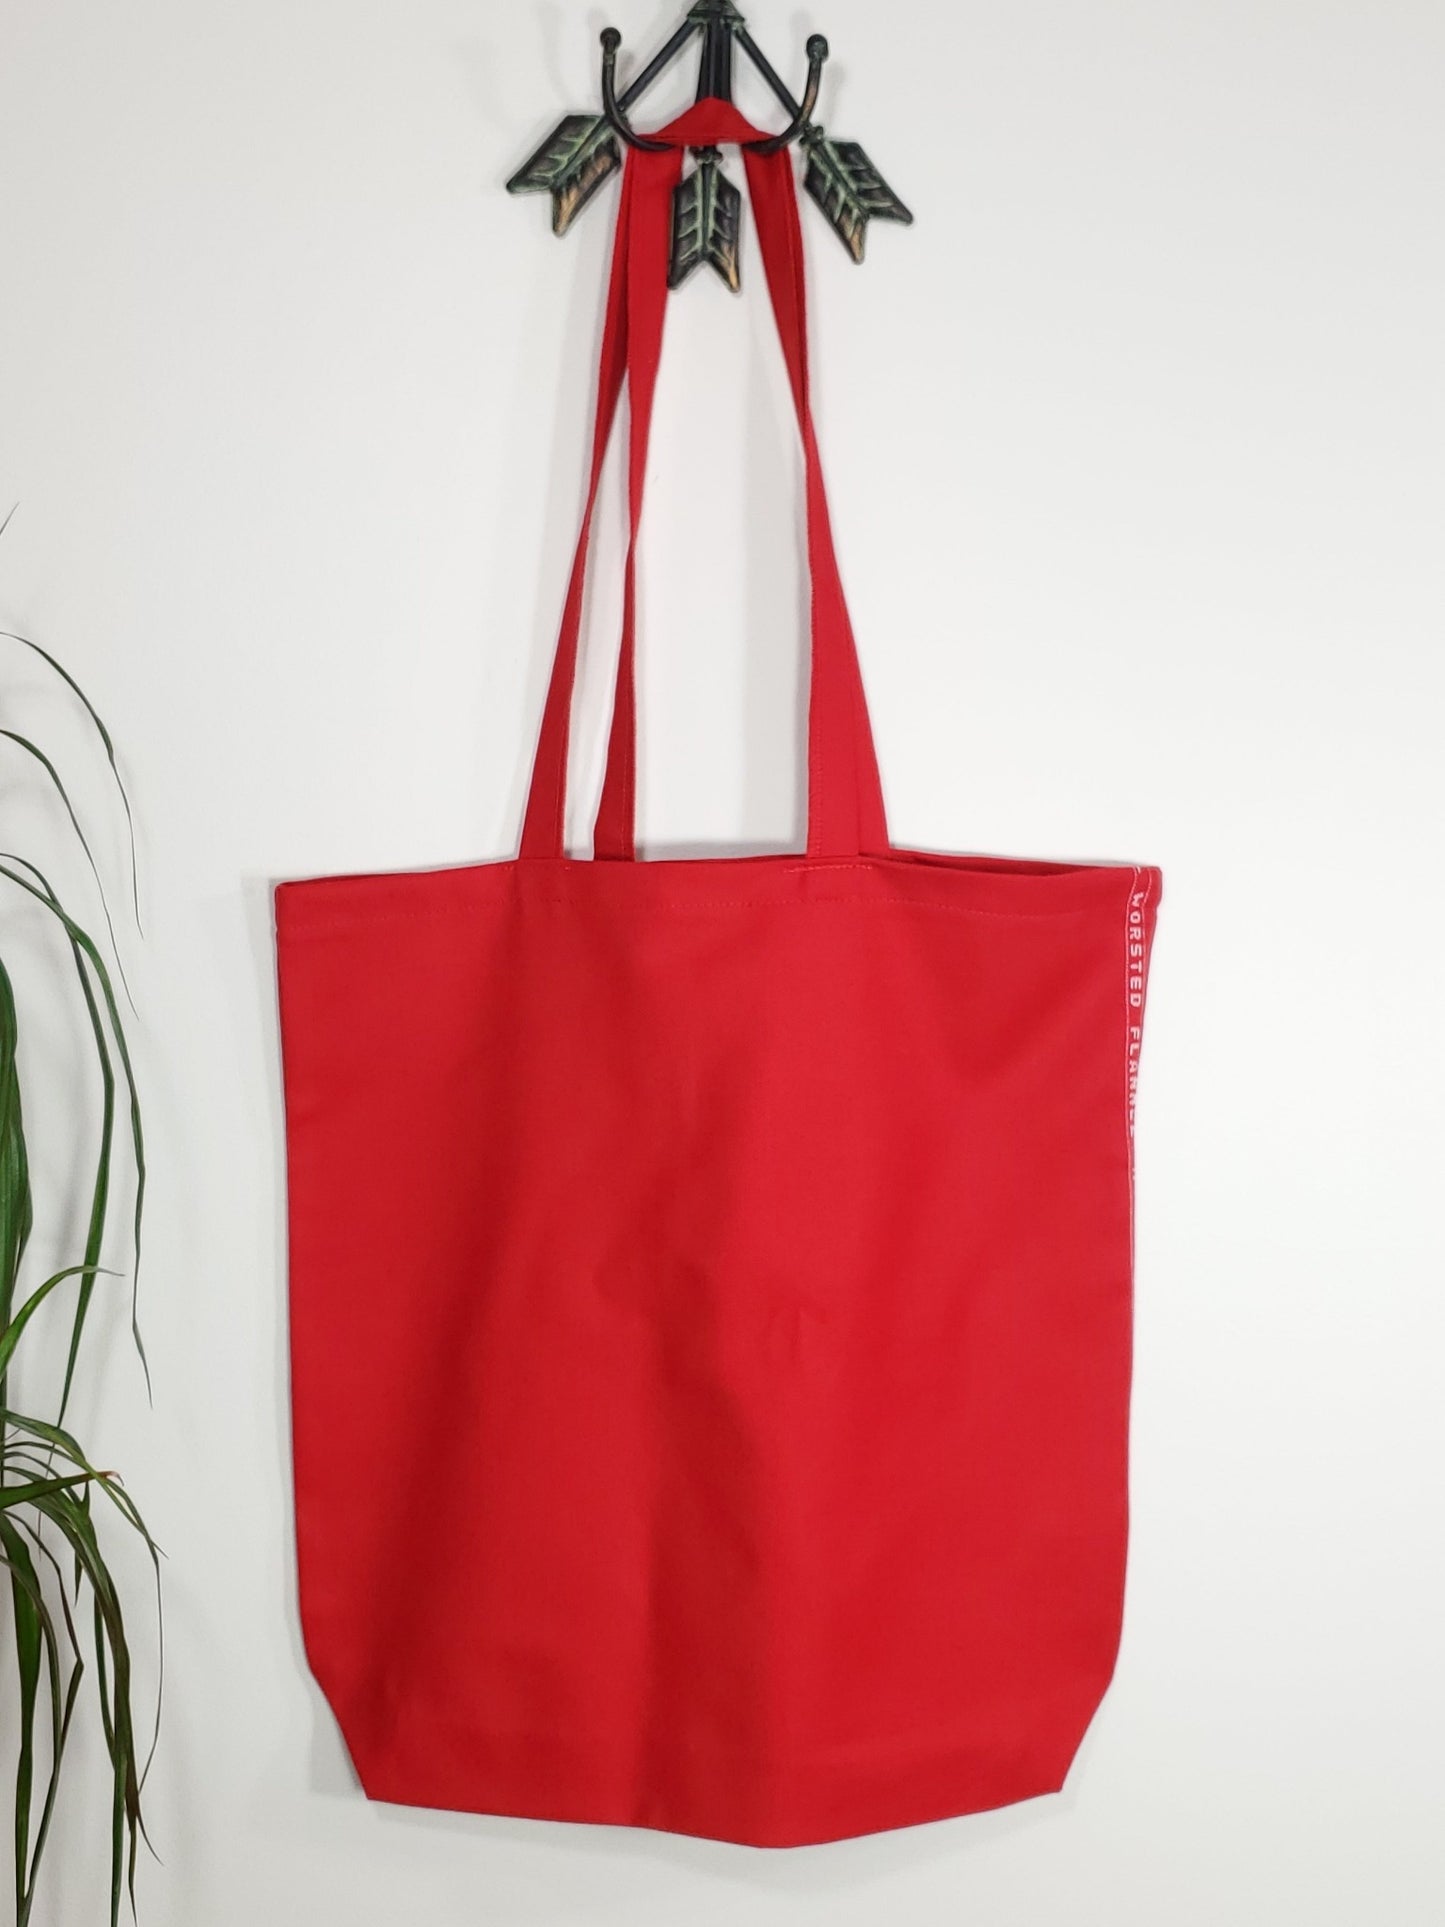 Market Tote bag - Strawberry Red